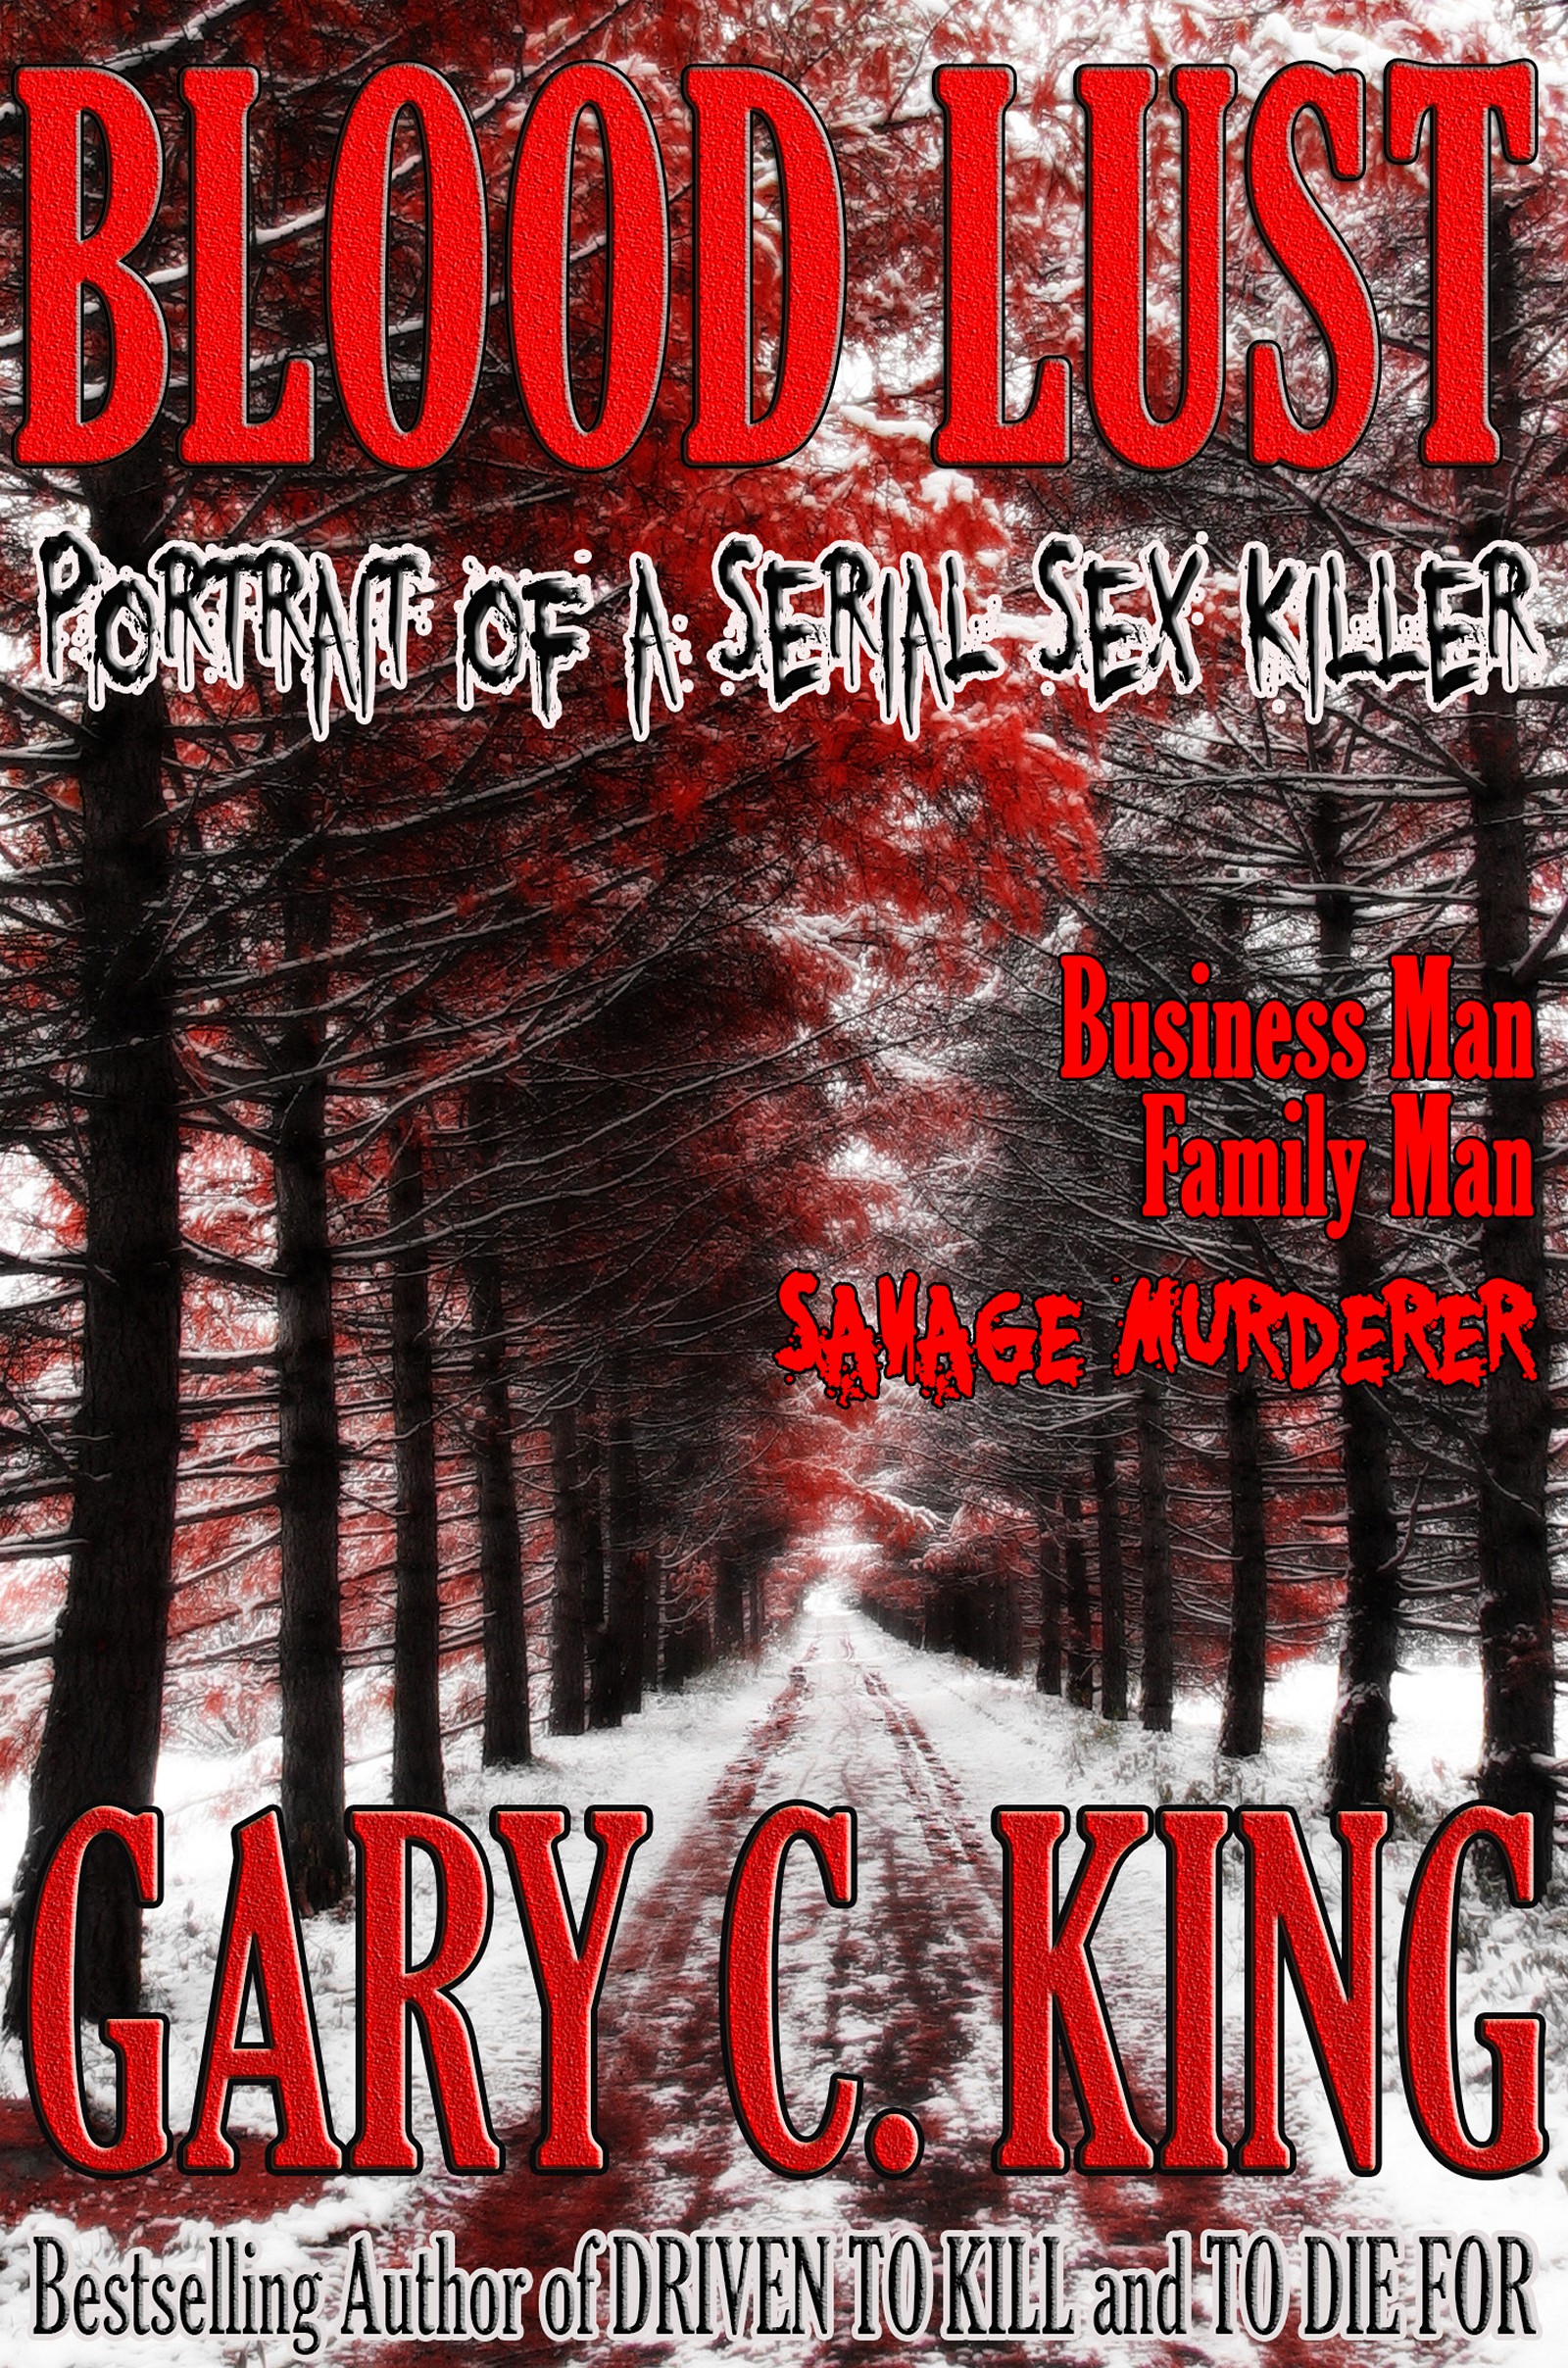 Blood Lust Portrait Of A Serial Sex Killer An Ebook By Gary C King - 